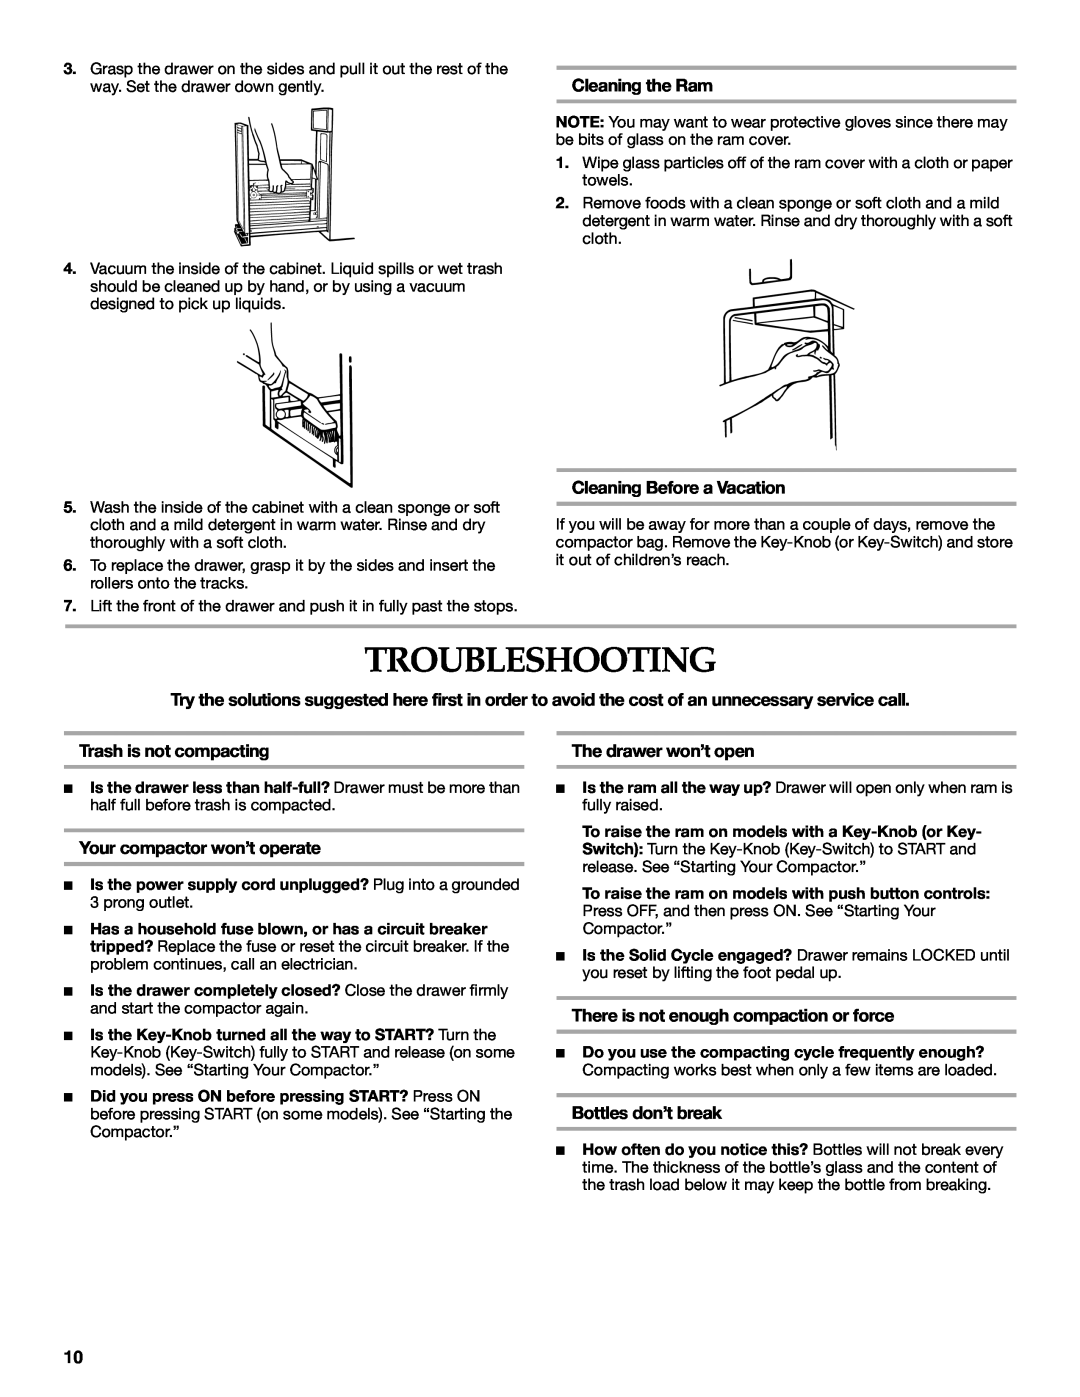 KitchenAid 9871915B manual Troubleshooting, Cleaning the Ram, Cleaning Before a Vacation, Trash is not compacting 